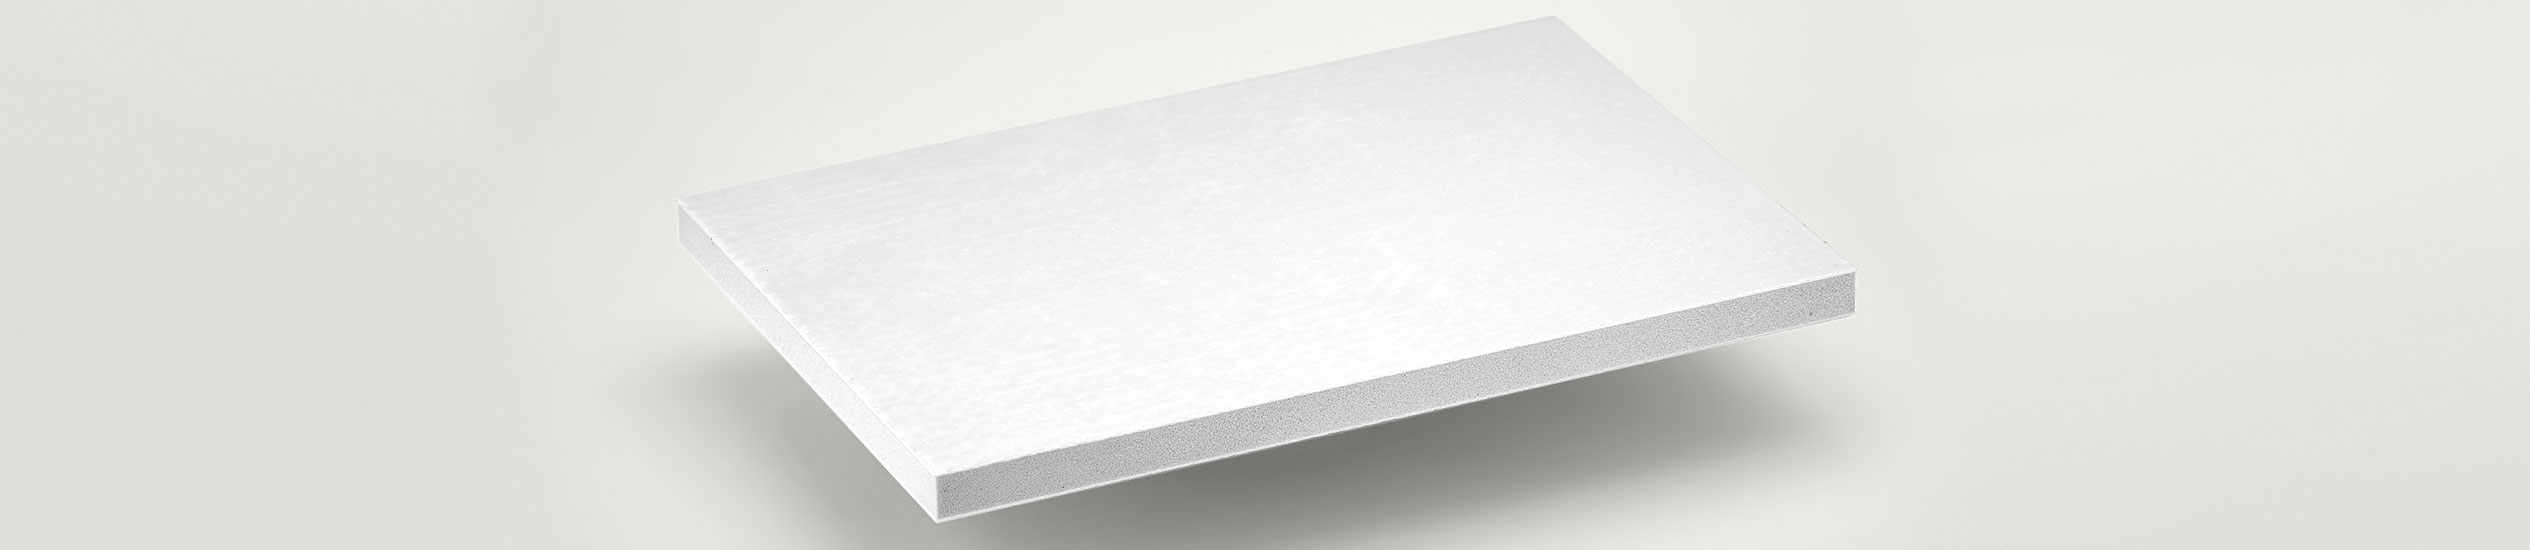 CLEARPET is a lightweight sandwich panel with a PET foam core and skins in a fi breglass impregnated with epoxy resin.